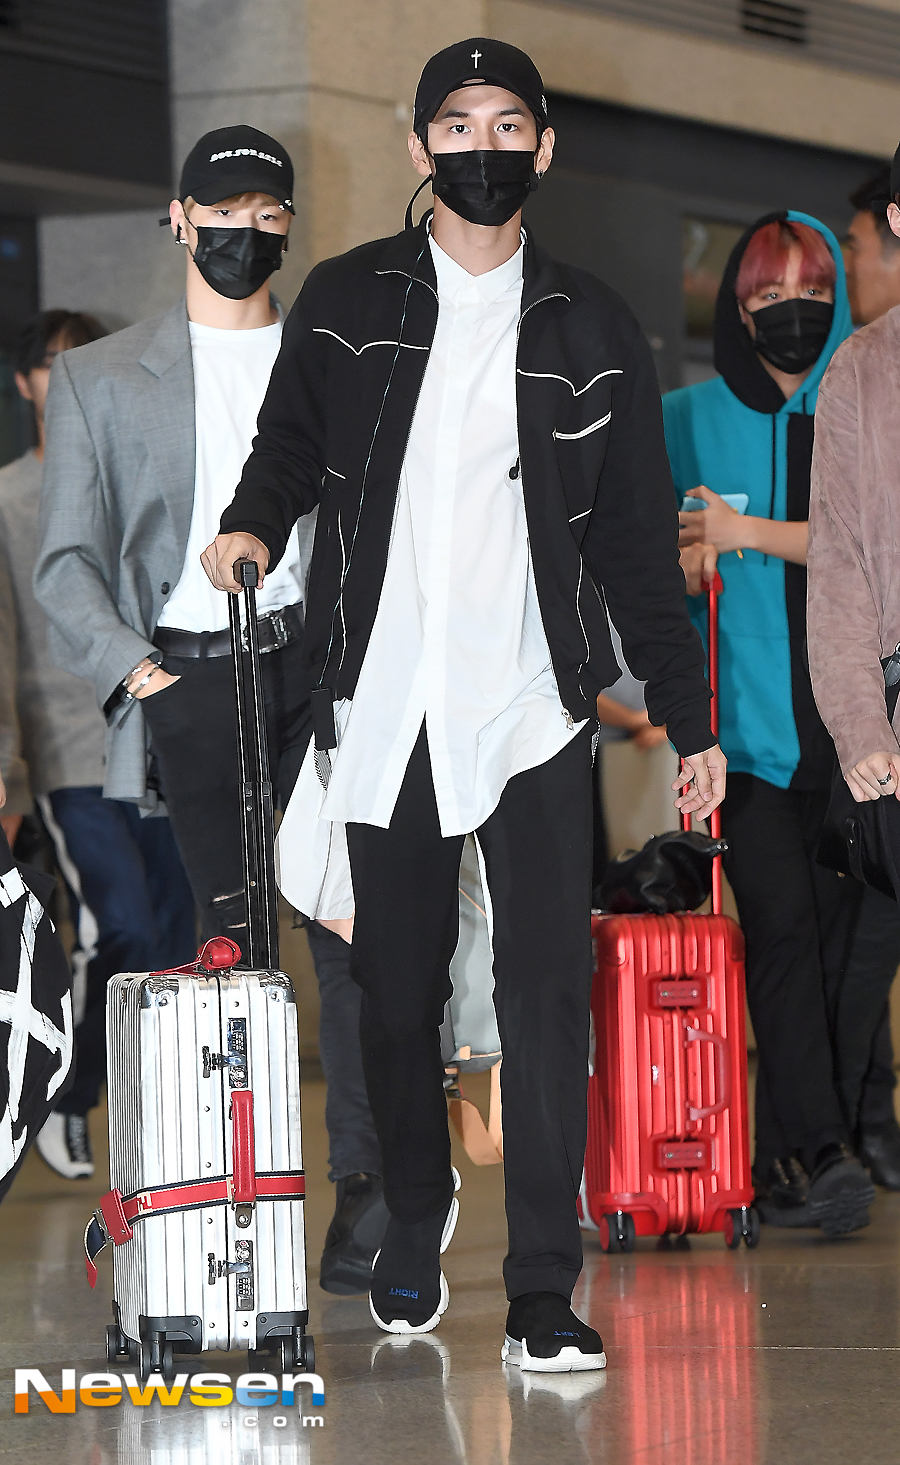 Wanna One arrived via the Incheon International Airport Terminal 1 on the afternoon of August 20 after completing an overseas schedule.Wanna One (Kang Daniel, Park Jihoon, Lee Dae-hwi, Kim Jae-hwan, Ong Seong-wu, Park Woo-jin, Ry Kwanlin, Yoon Ji-sung, Hwang Min-hyun, Bae Jin-young and Ha Sung-woon) are leaving the arrival hall on the day.Jung Yoo-jin